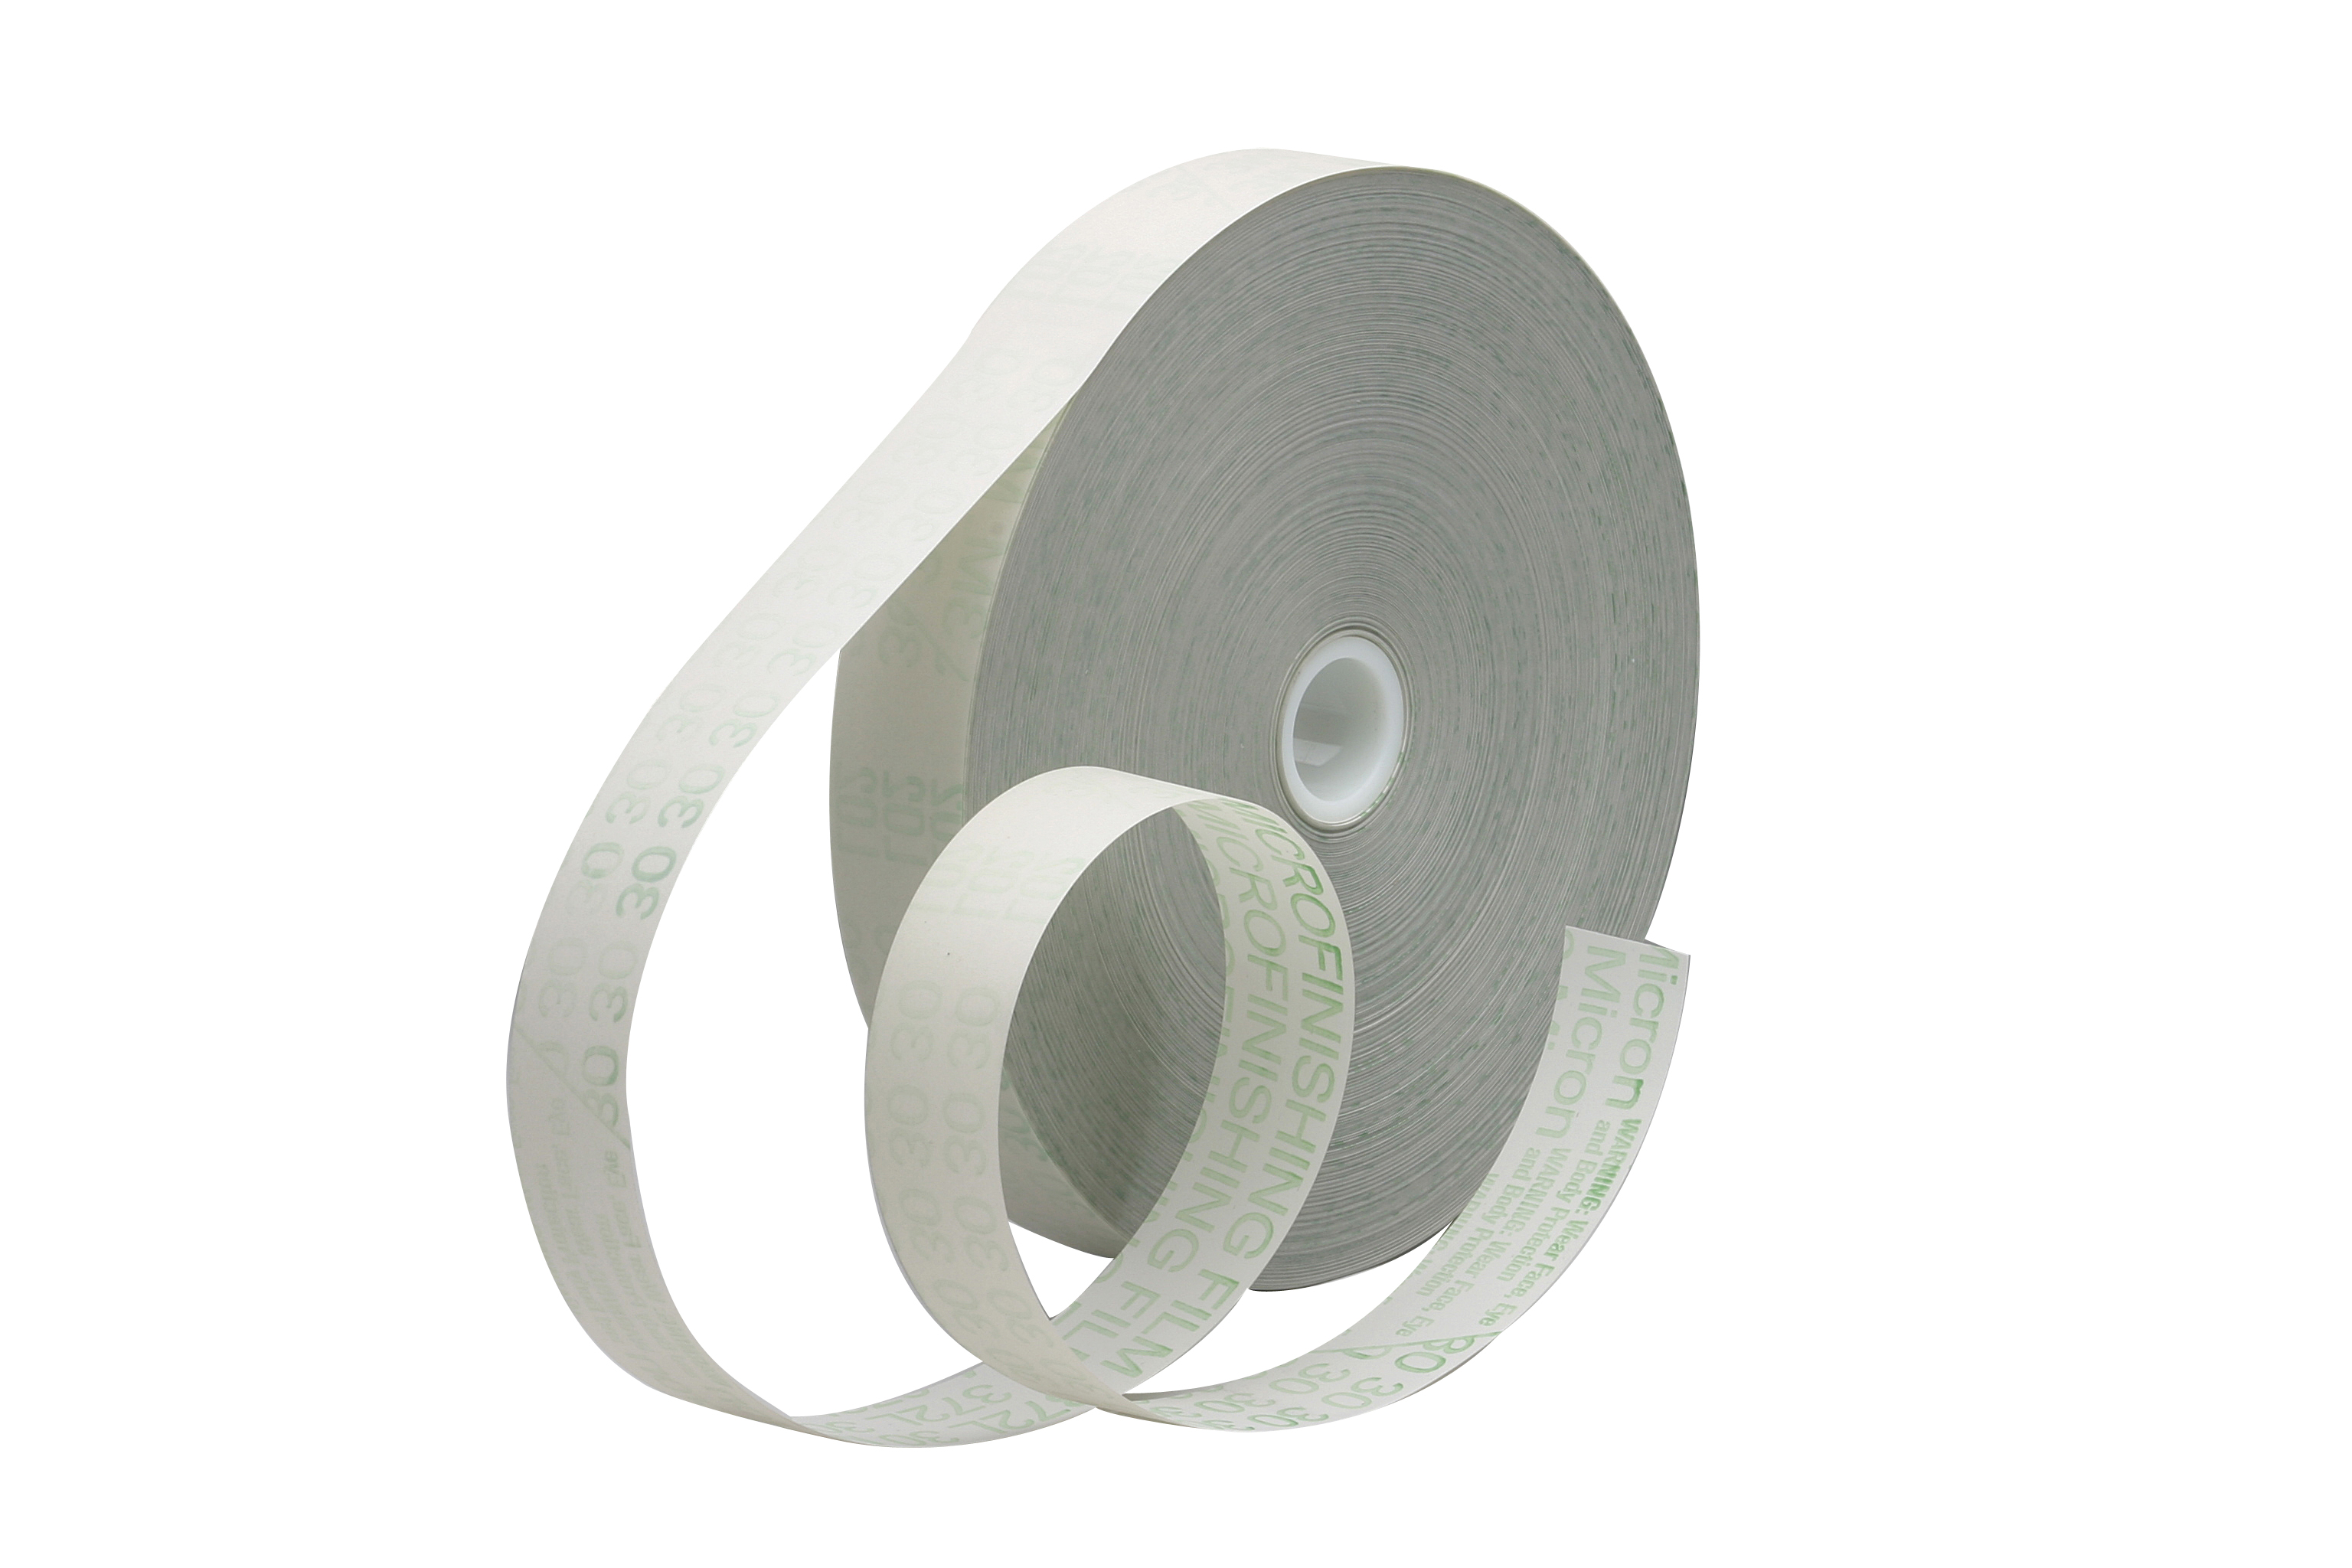 Solid ply reinfrorced insertion neoprene rubber strip various widths available 5m x 50mm wide 5m & 10m lengths water/oil/weather seal 2mm thick